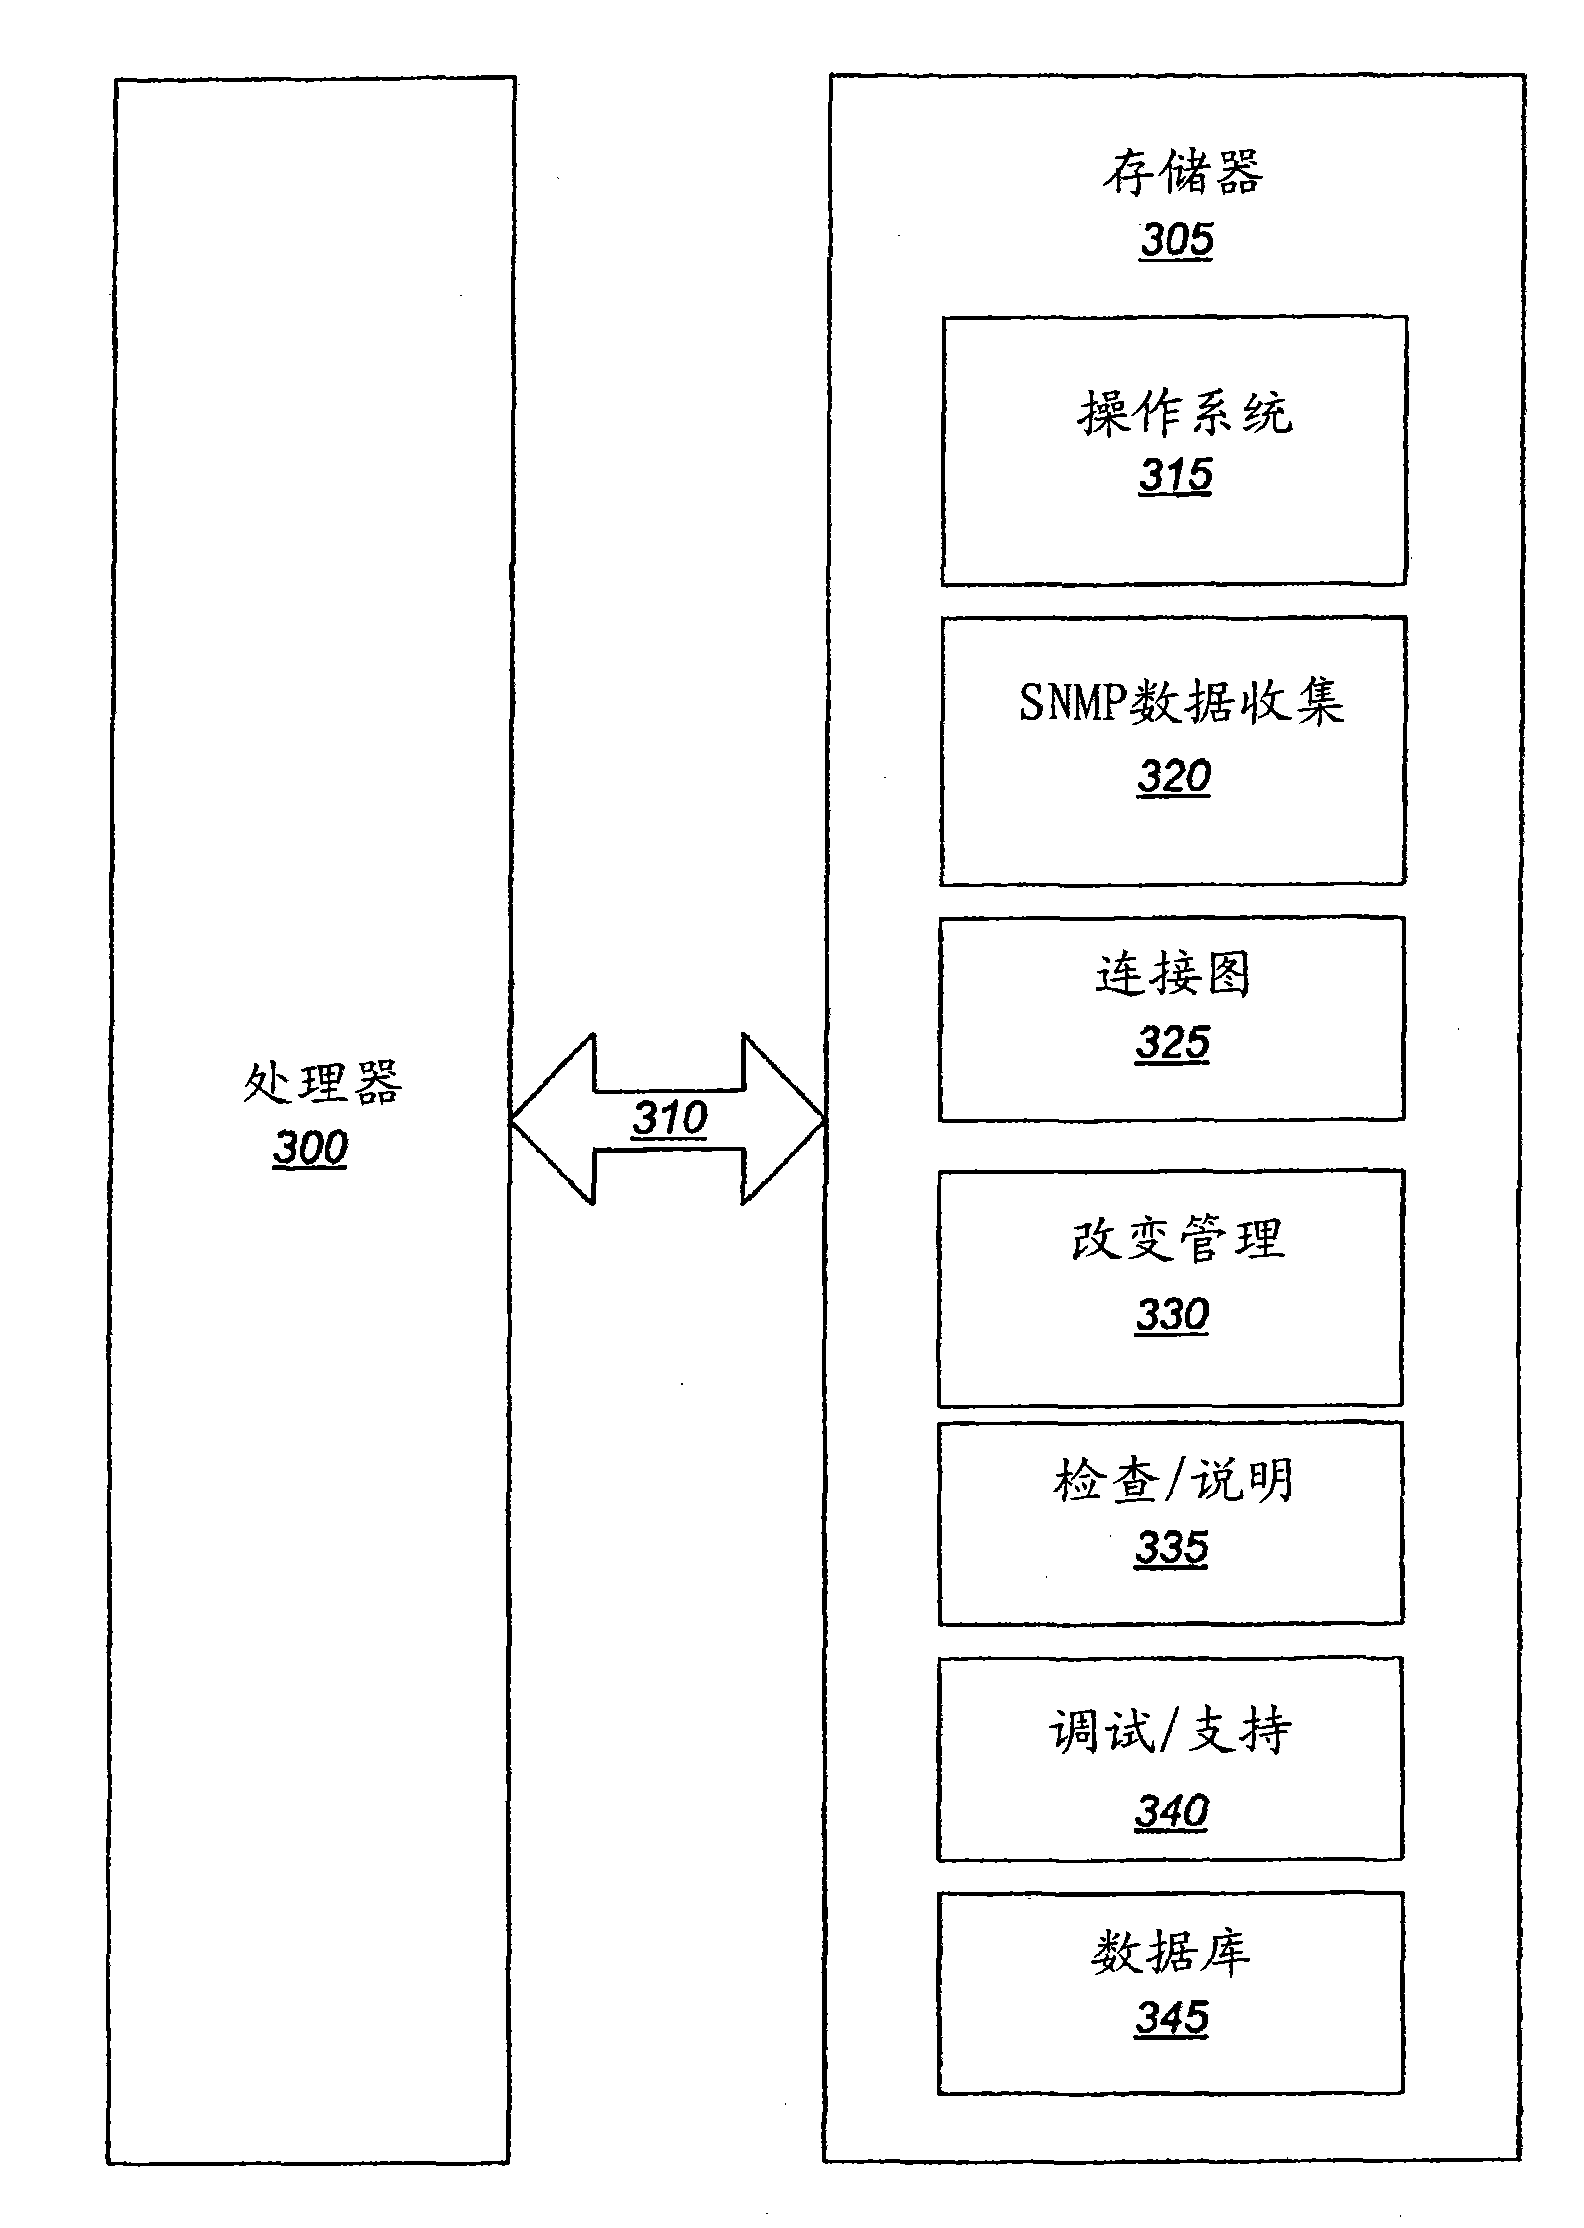 Methods, systems, and computer program products for using managed port circuitry